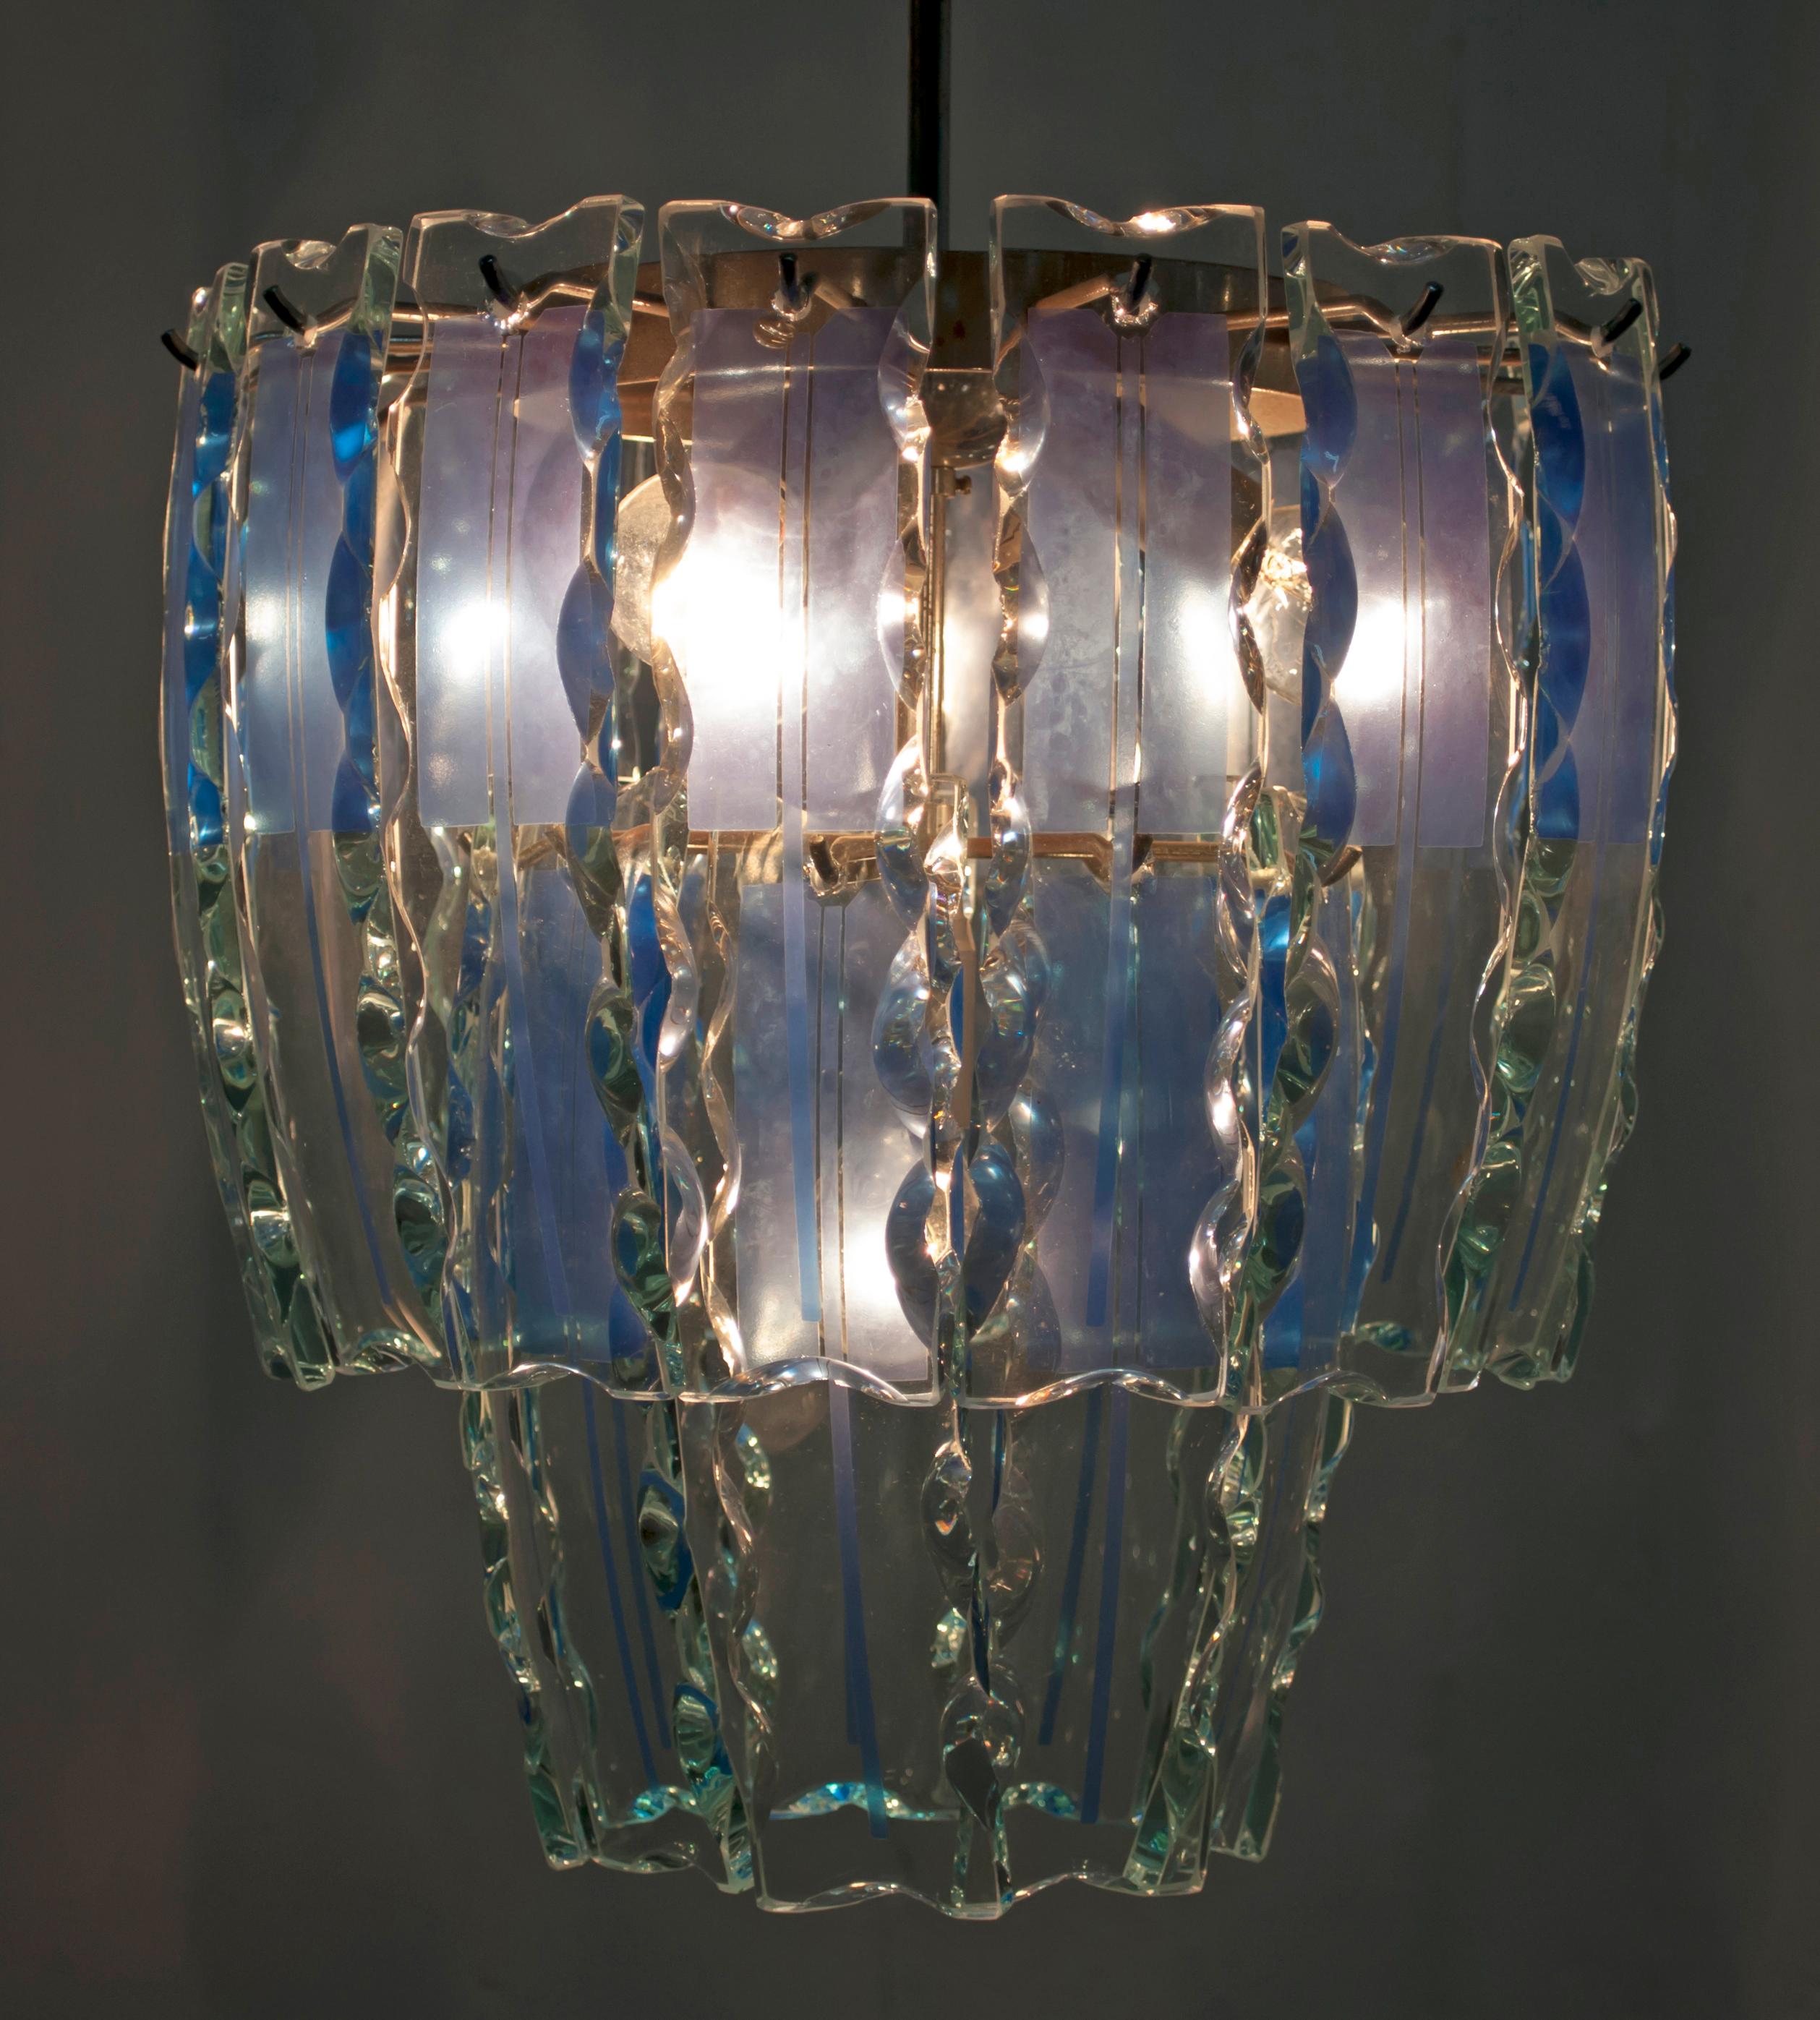 This four-light chandelier was made by Fontana Arte in chiseled Murano glass in a blue and transparent color.

Fontana Arte S.p.A. is an Italian company founded in Milan (as Fontana Arte) in 1932 by Luigi Fontana and Giò Ponti and specialized in